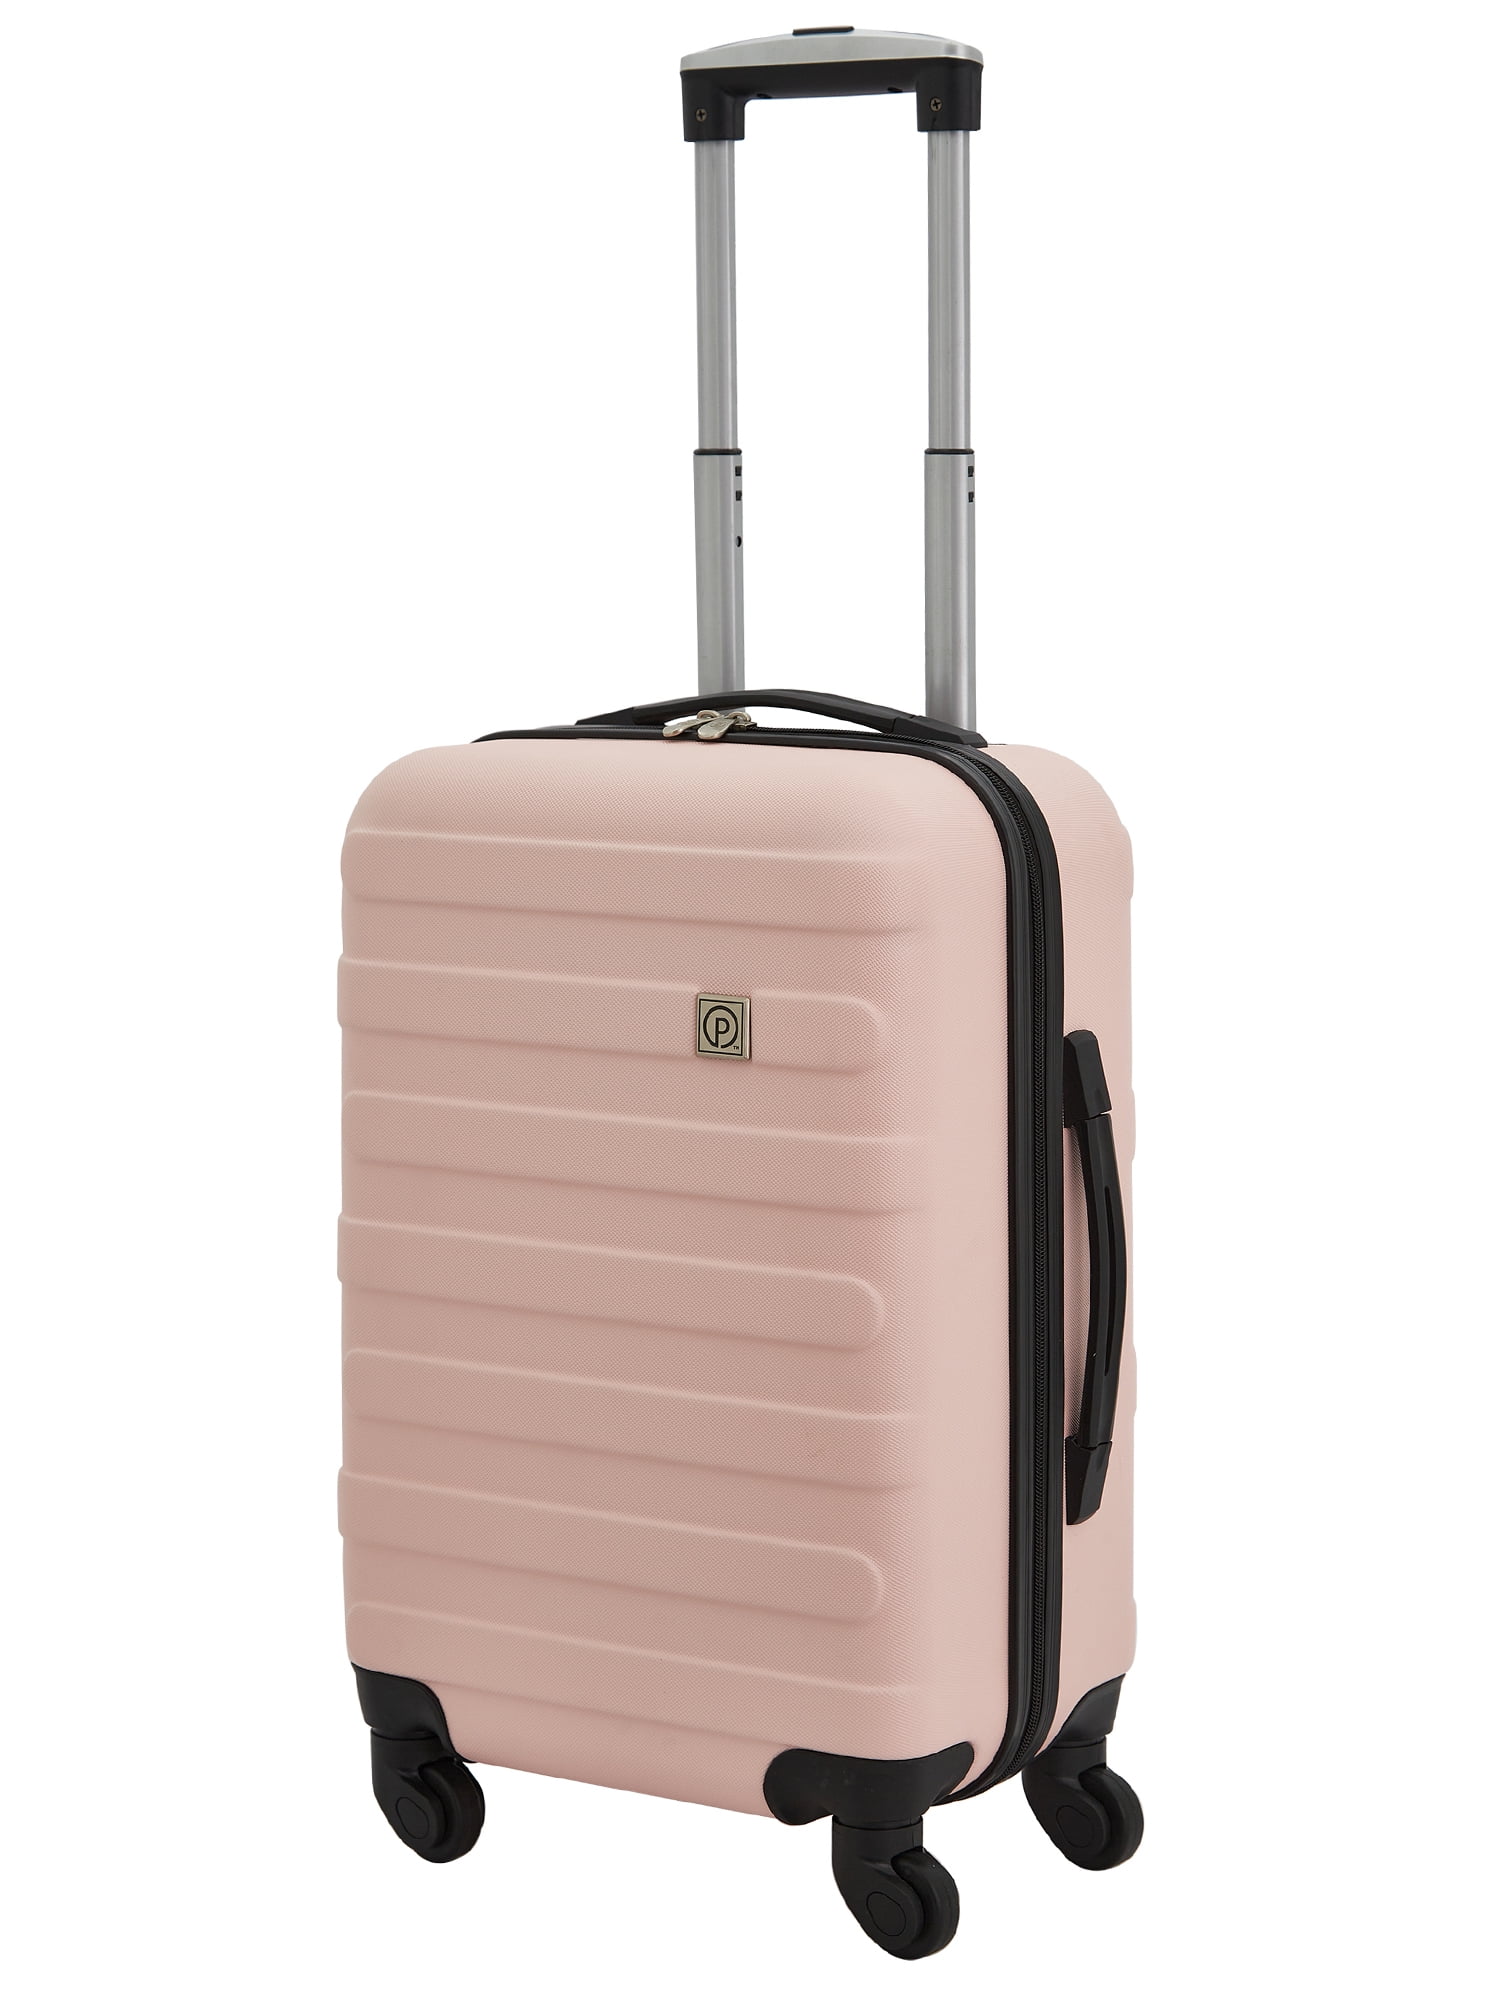 AWAY Travel The CARRY-ON PEARLIZED Color COAST Suitcase Durable